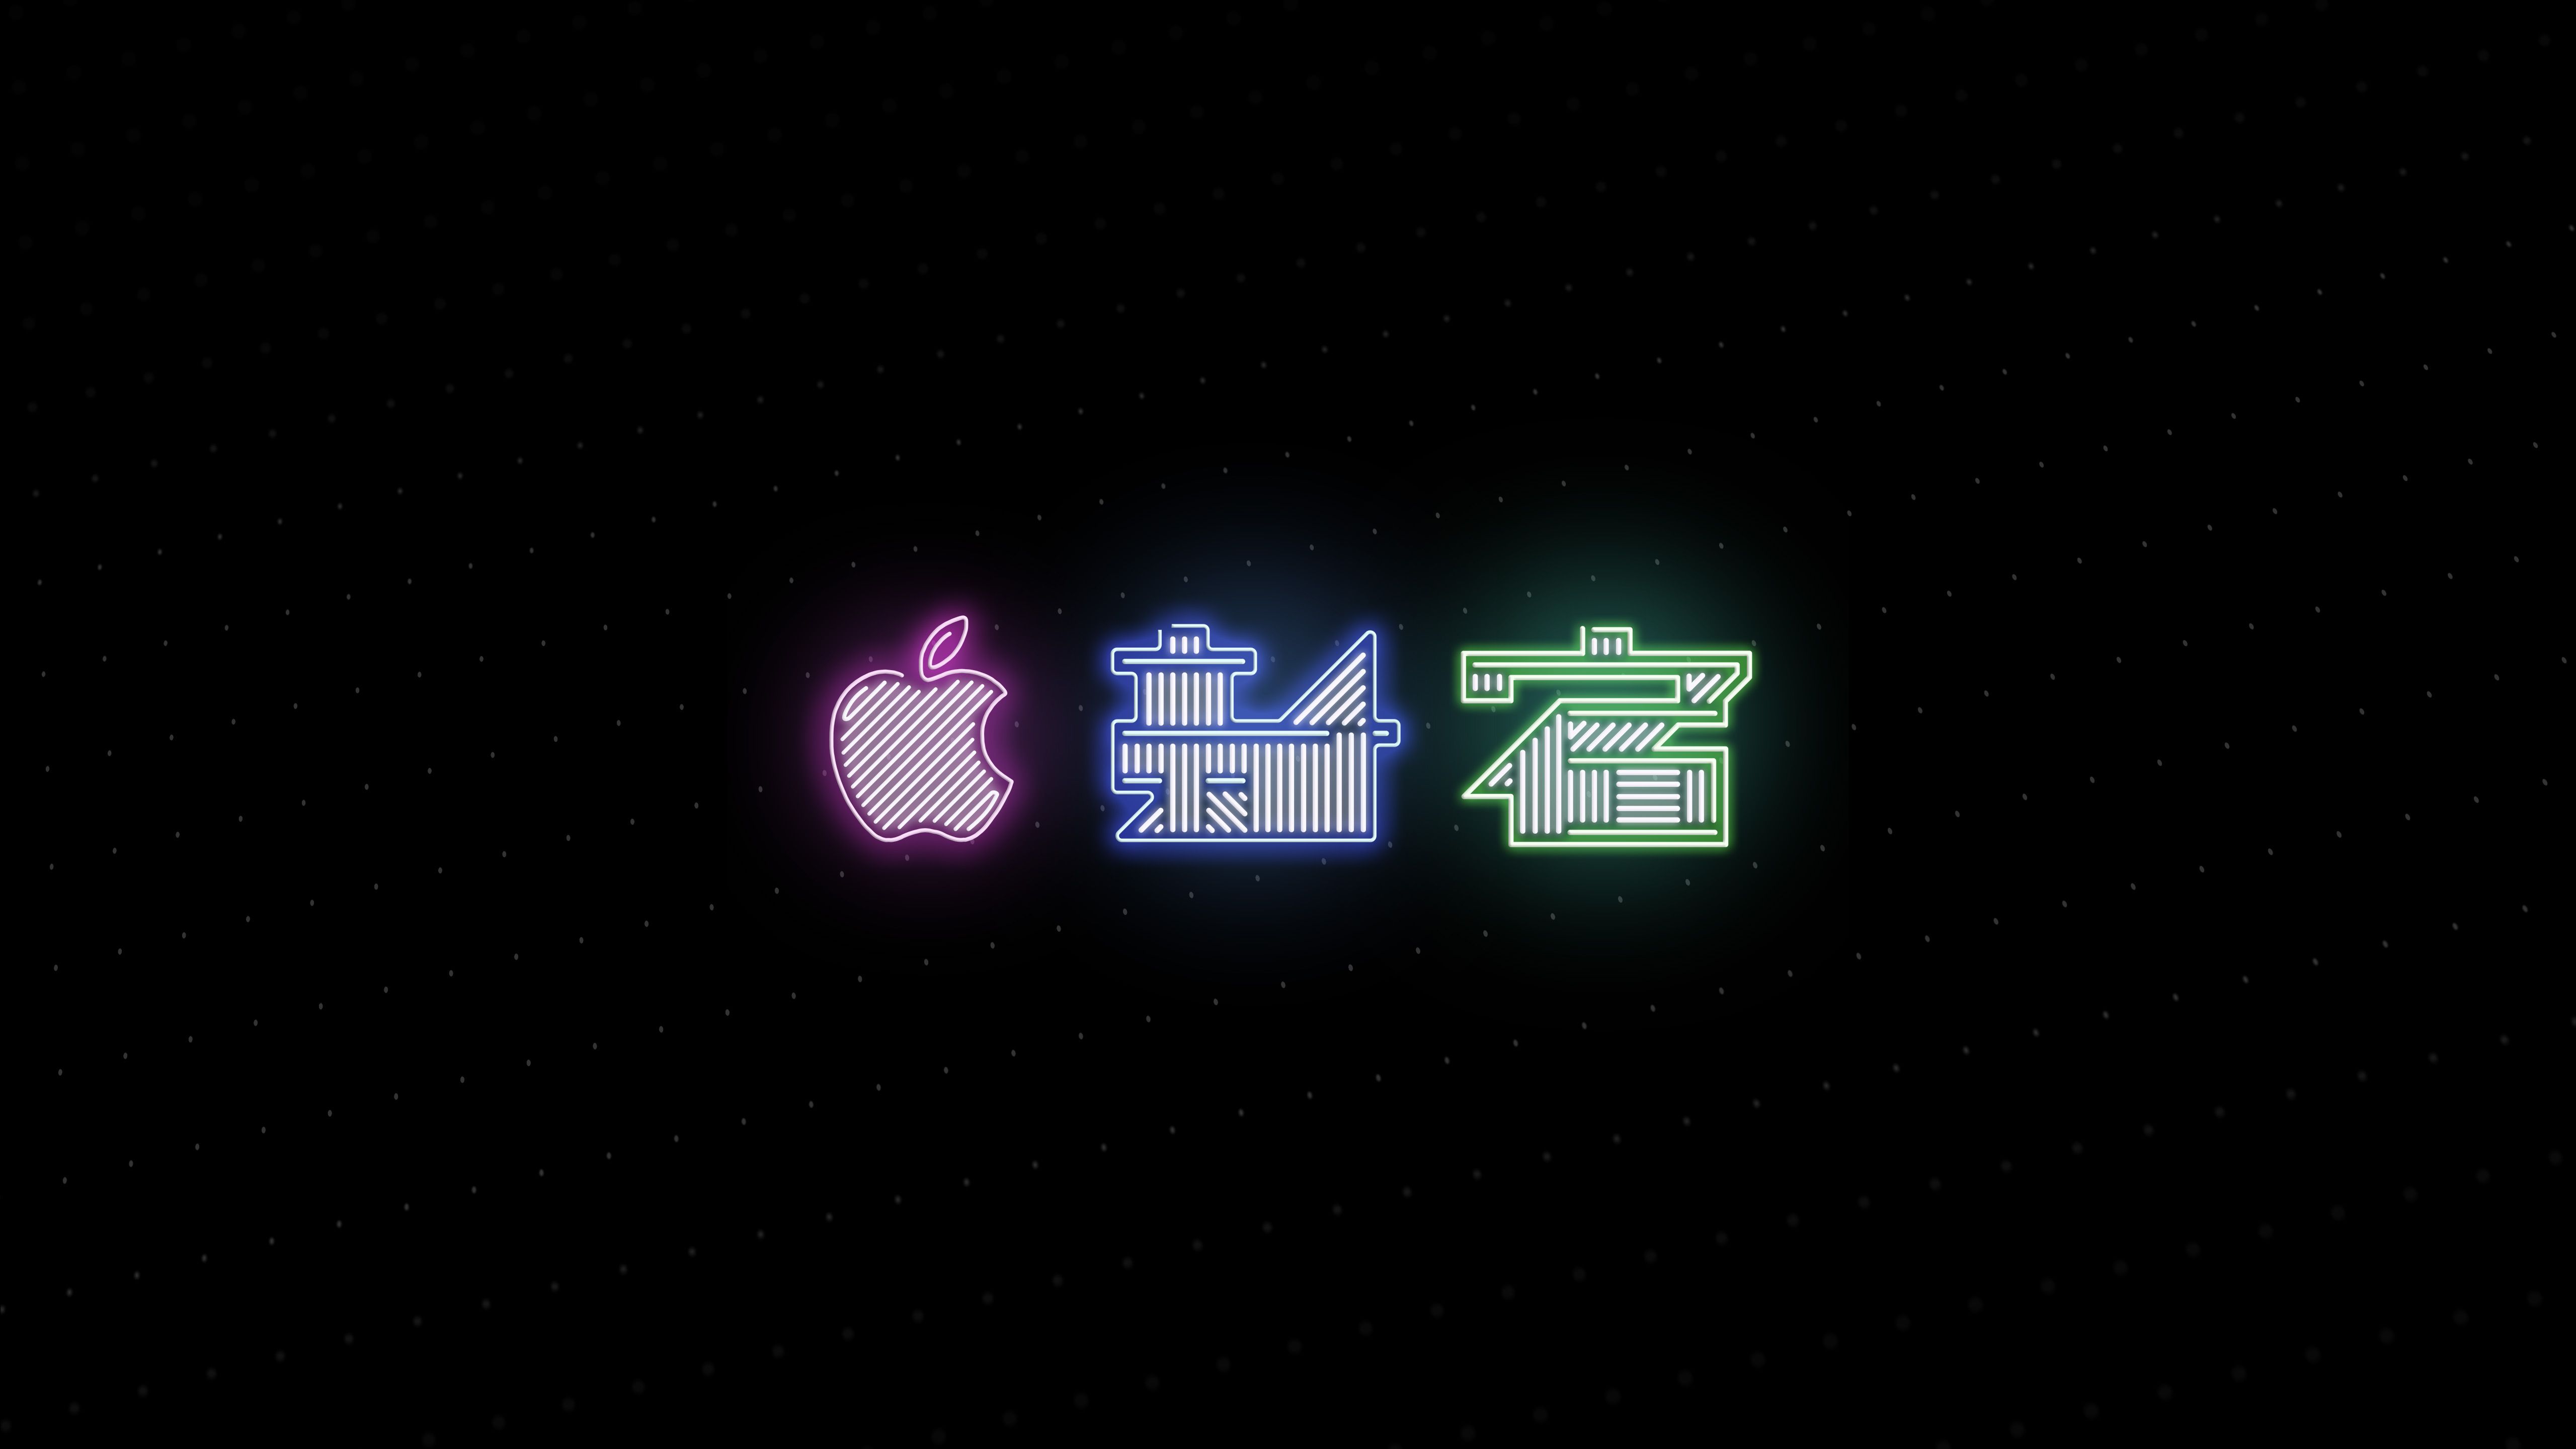 The Complete Neon Apple Wallpaper Collection